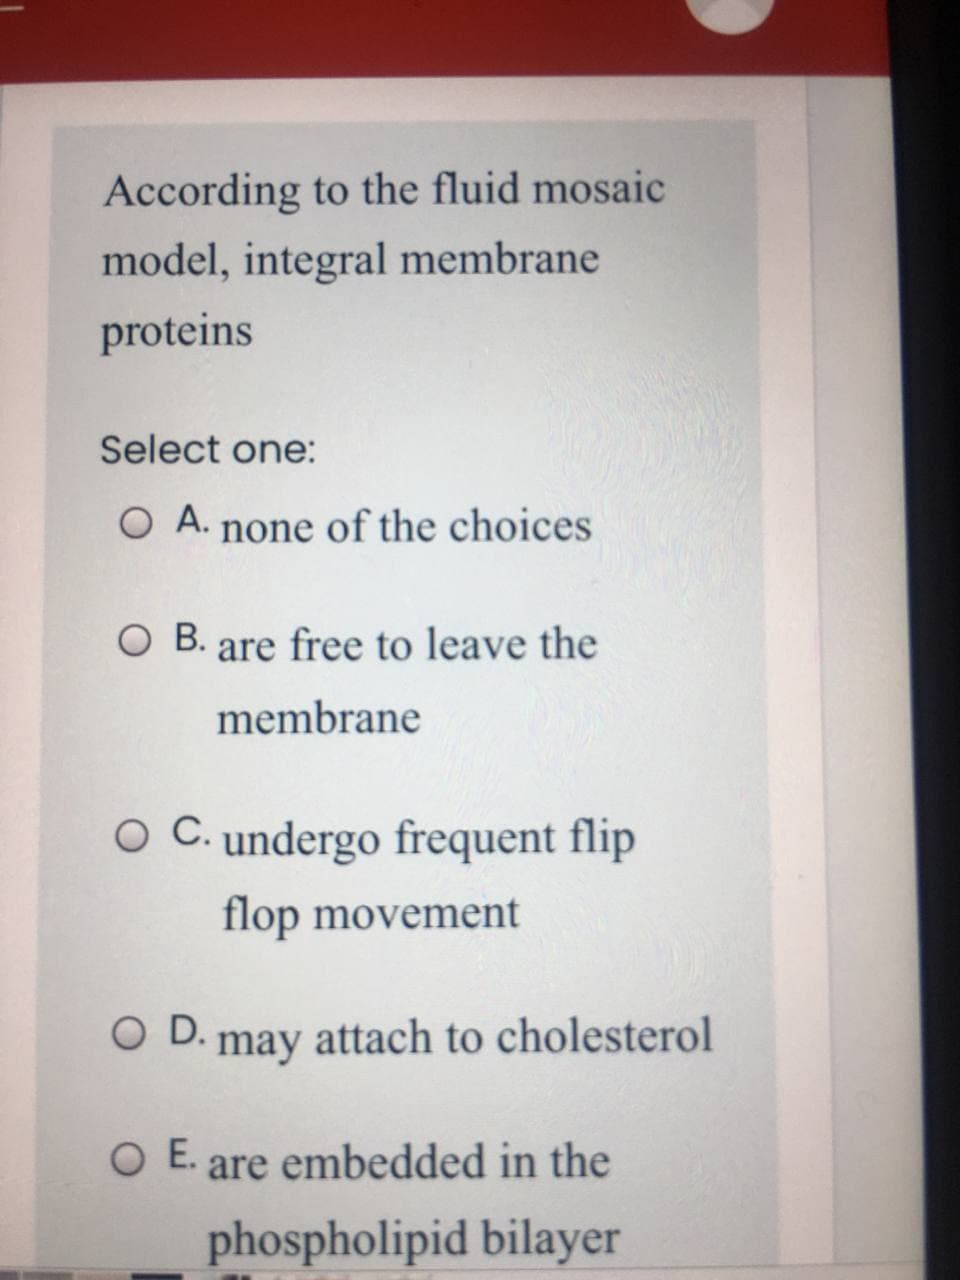 According to the fluid mosaic
model, integral membrane
proteins
Select one:
O A. none of the choices
O B. are free to leave the
membrane
O C. undergo frequent flip
flop movement
O D. may attach to cholesterol
O E.
are embedded in the
phospholipid bilayer
